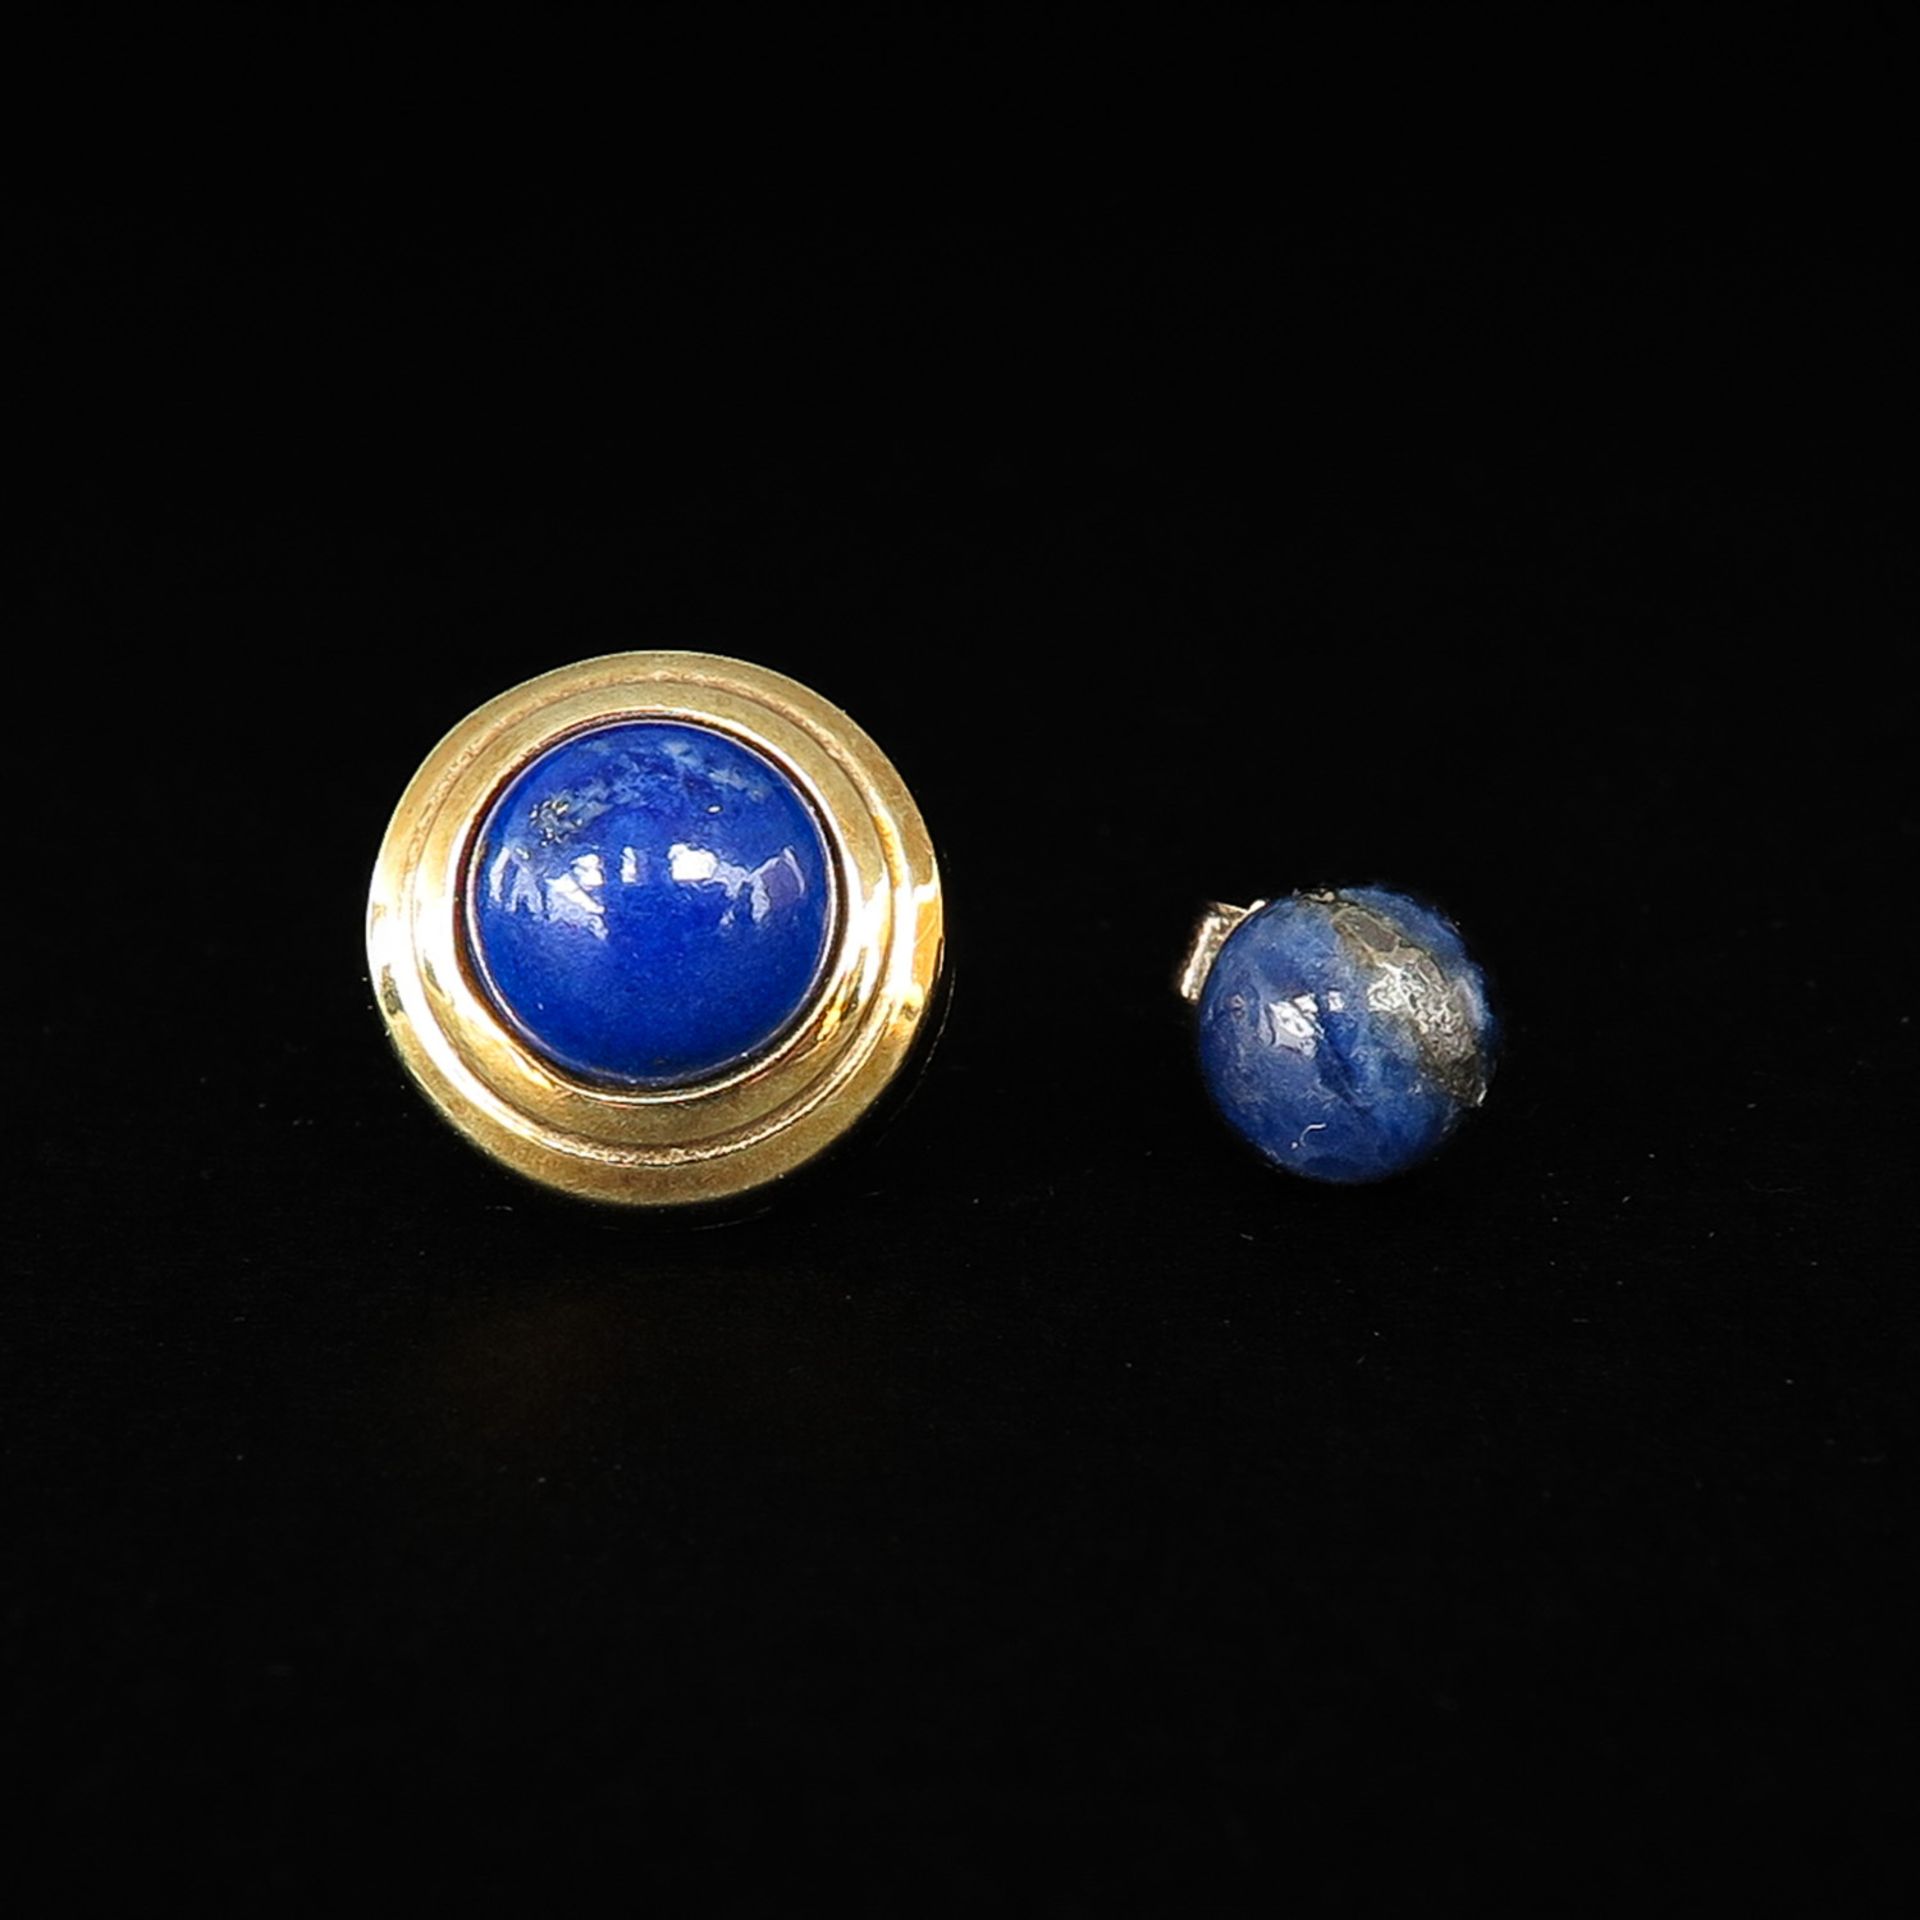 A Collection of Lapis Lazuli Jewelry - Image 6 of 10